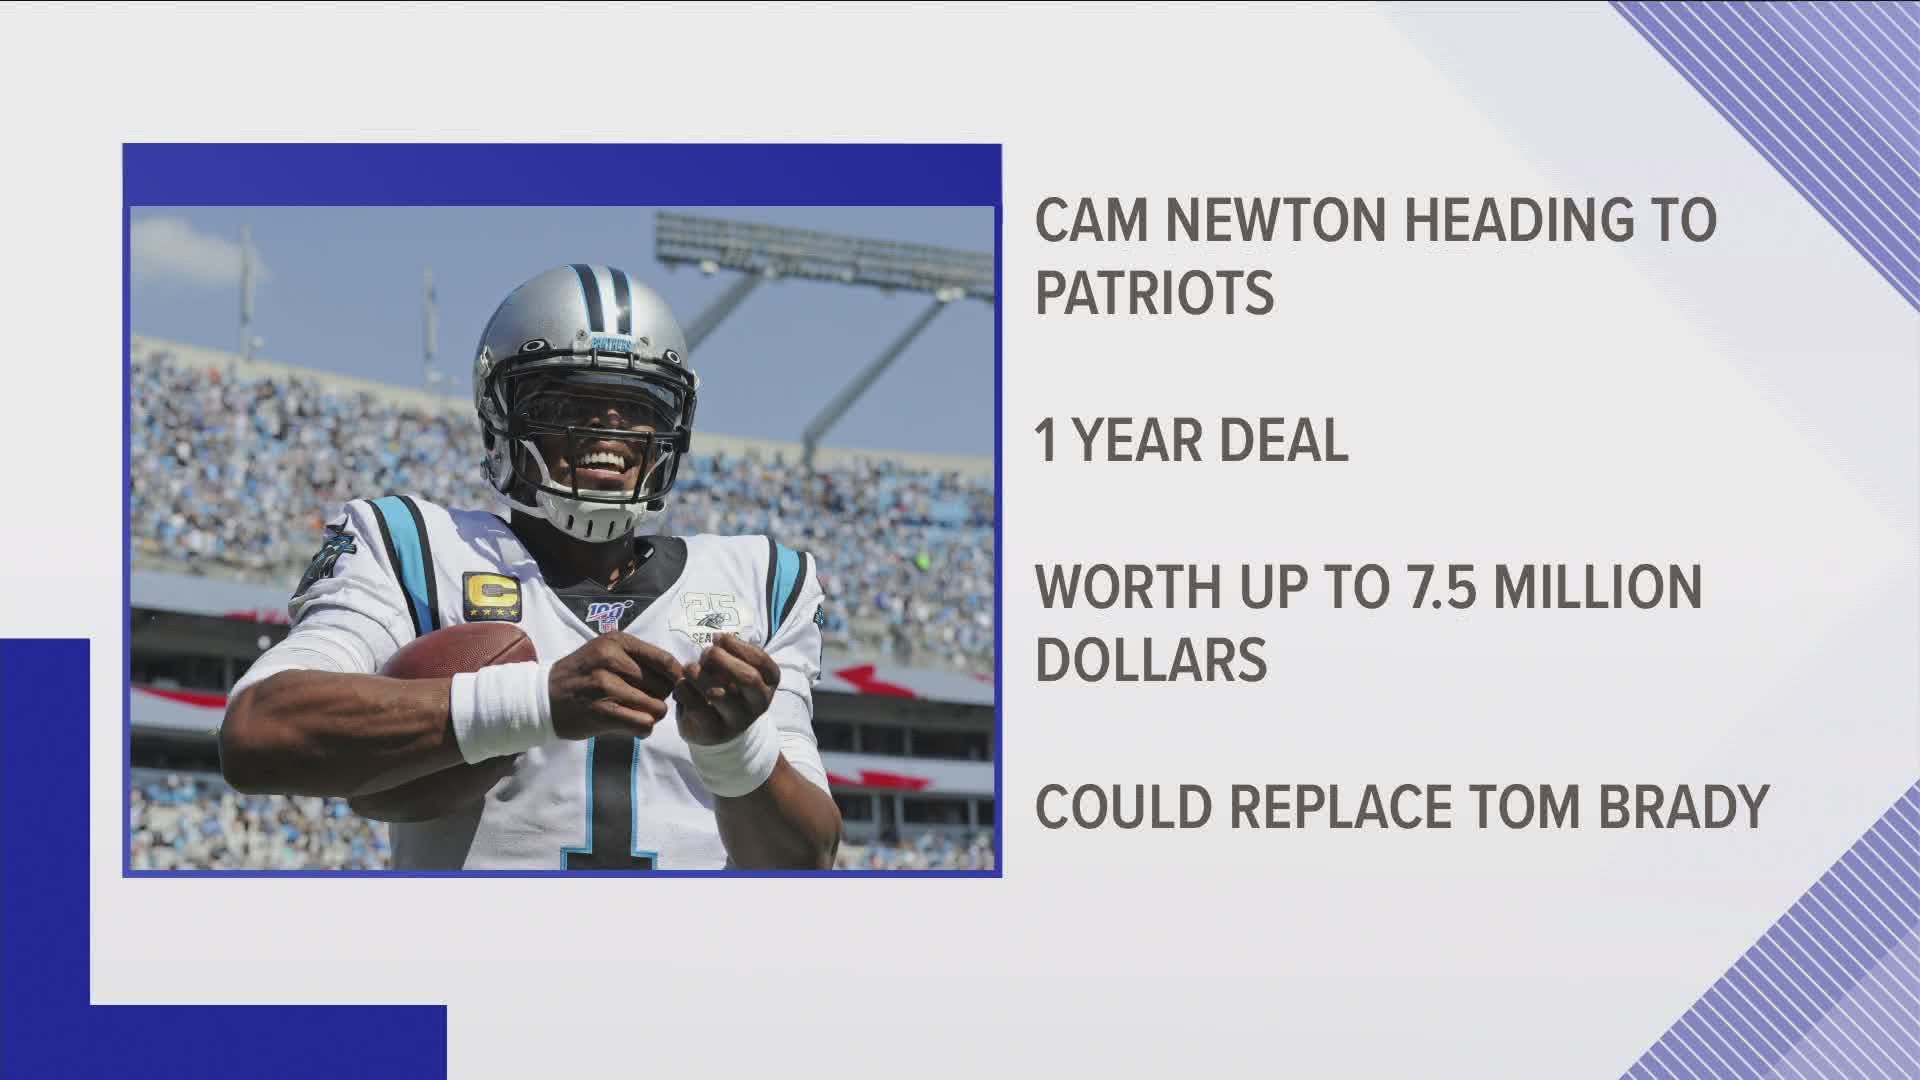 Newton was released by the Panthers in March. He'll now head to New England after 3 months without a team.